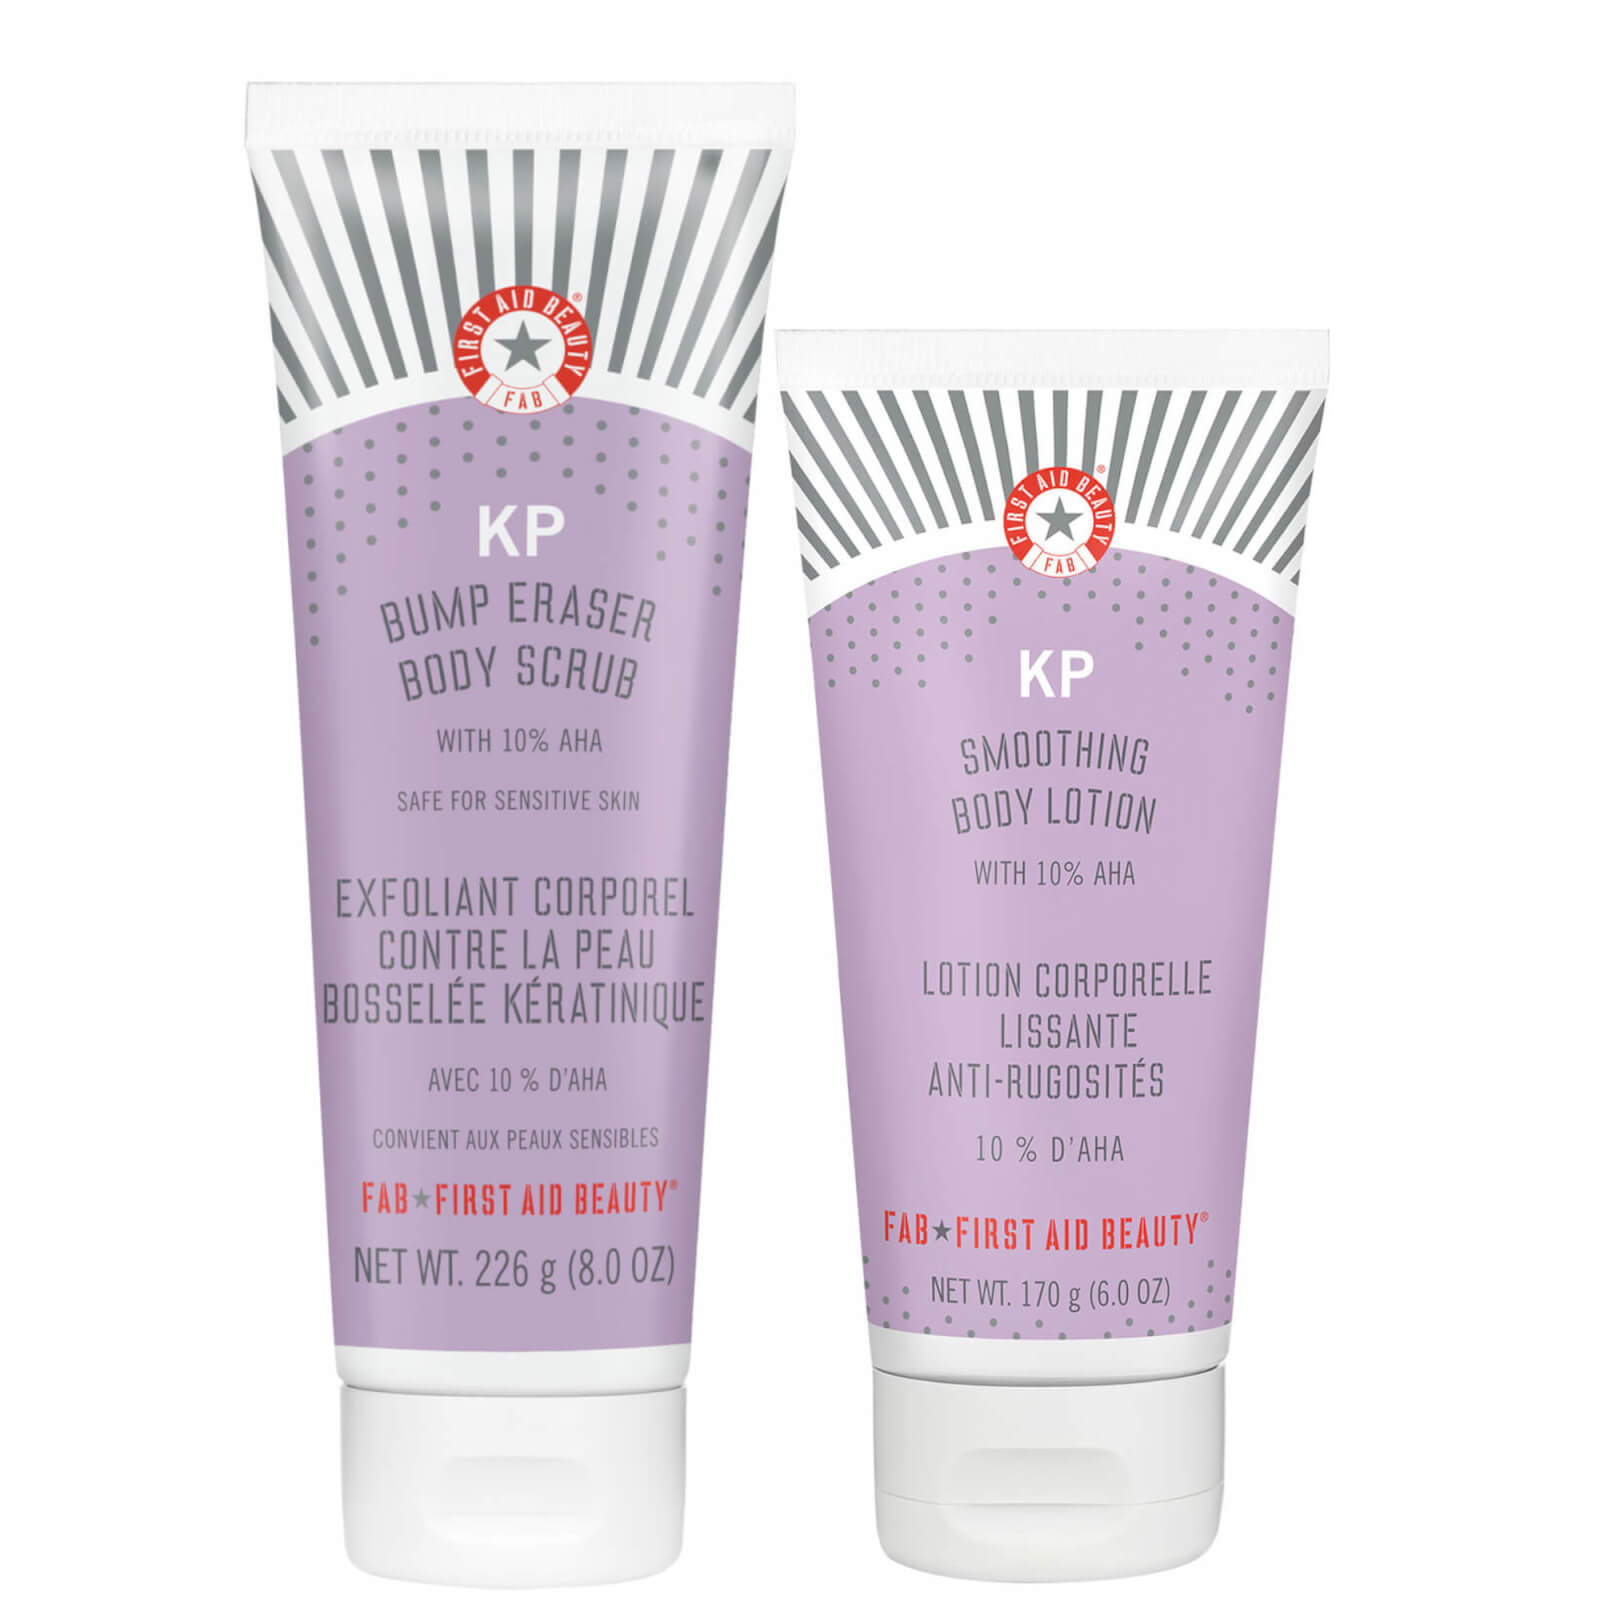 First Aid Beauty Body Bundle Kp Bump Eraser Body Scrub With 10% Aha 226ml And Kp Smoothing Body Lotion With 10% Aha 1